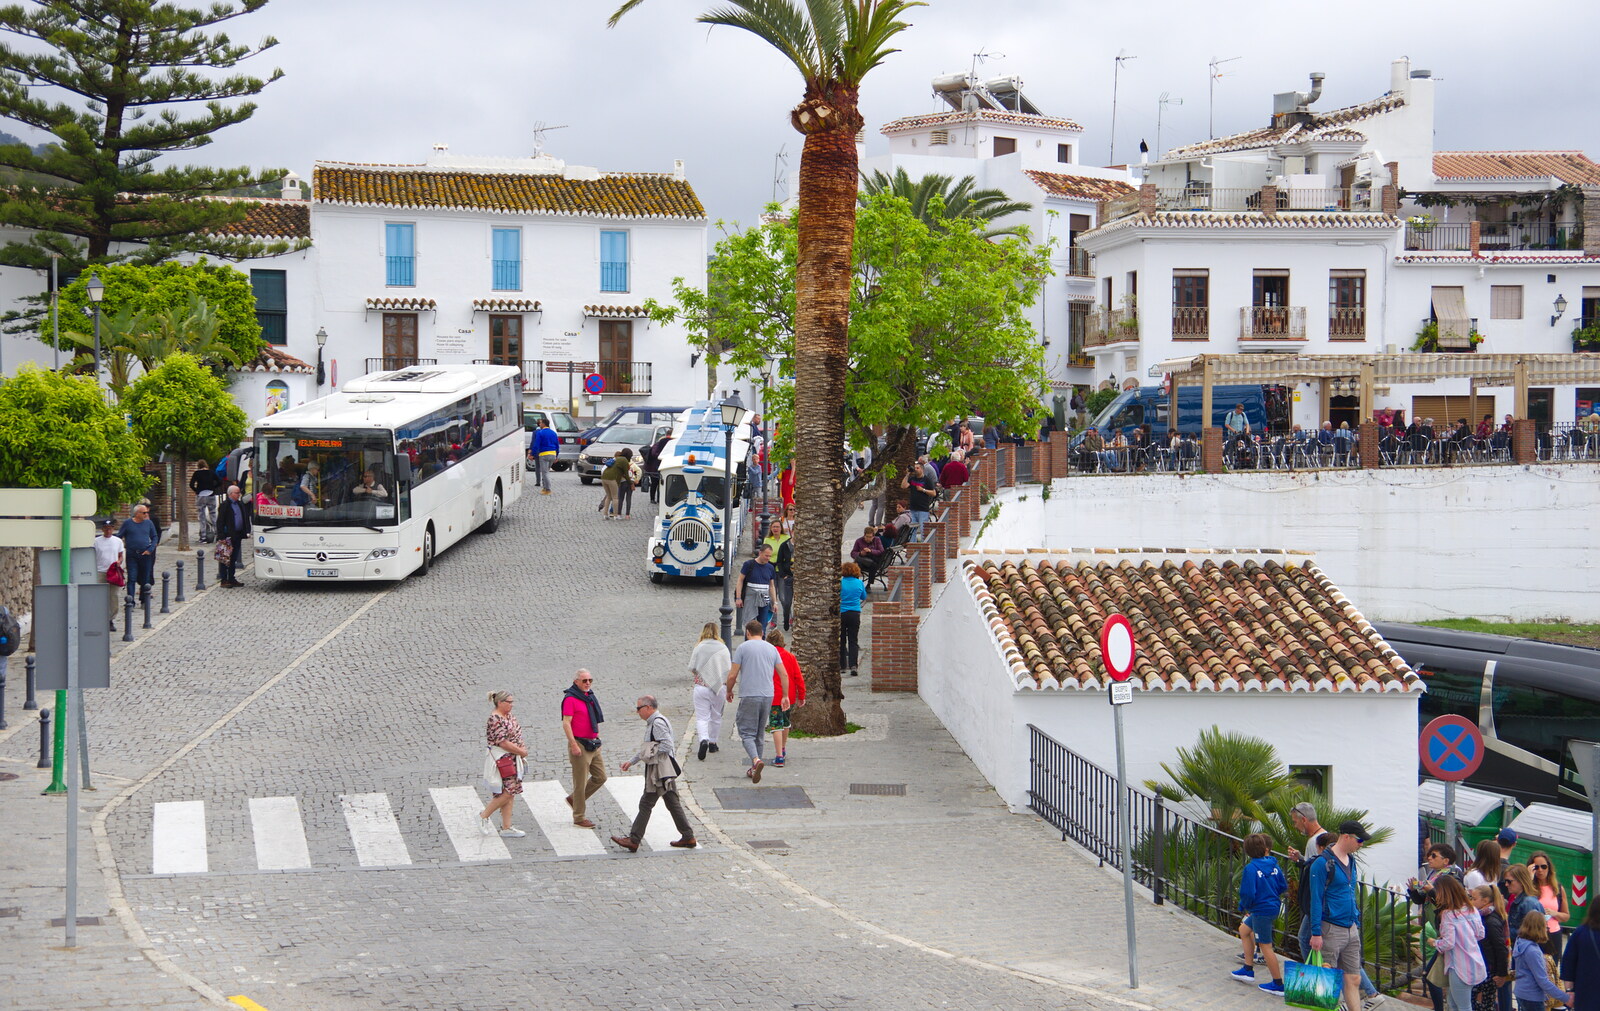 Tourist coaches and the mini train from The Caves of Nerja, and Frigiliana, Andalusia, Spain - 18th April 2019